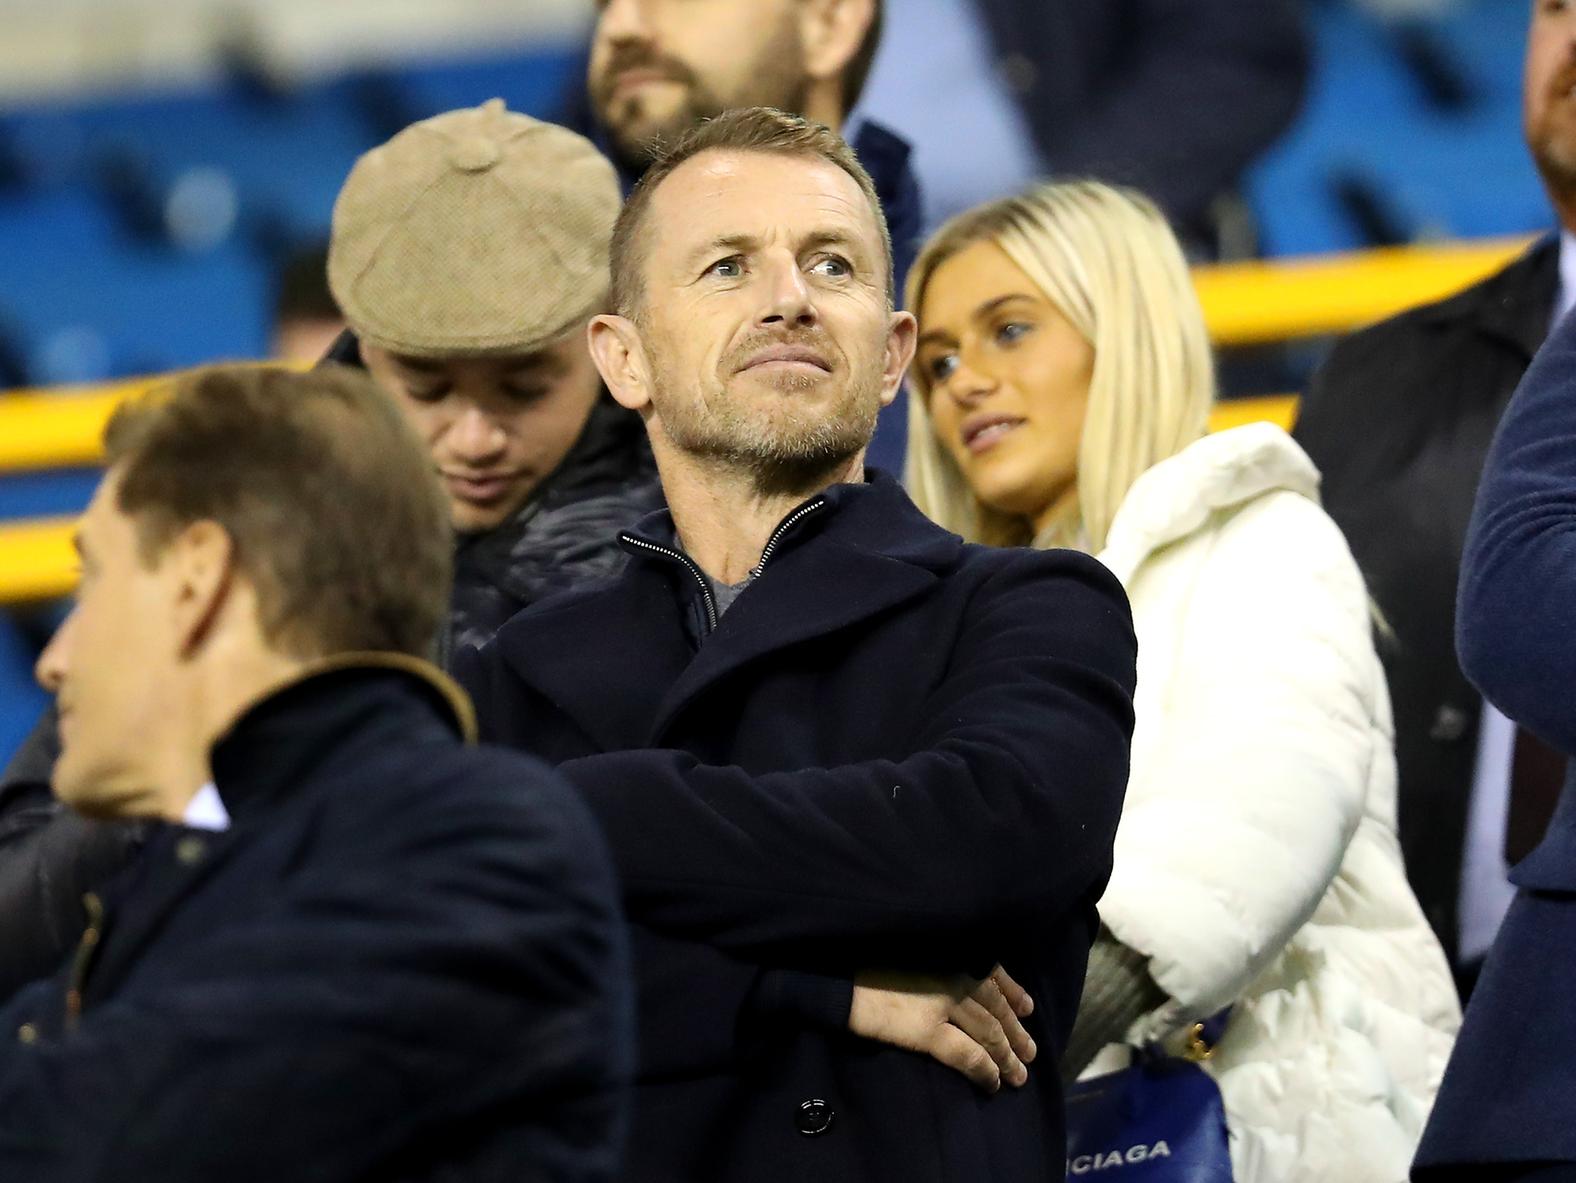 Millwall's new manager Gary Rowett has claimed that he will have the club's backing to make signings in January, but will let his current crop of players prove their worth first over the coming weeks. (South London Press)